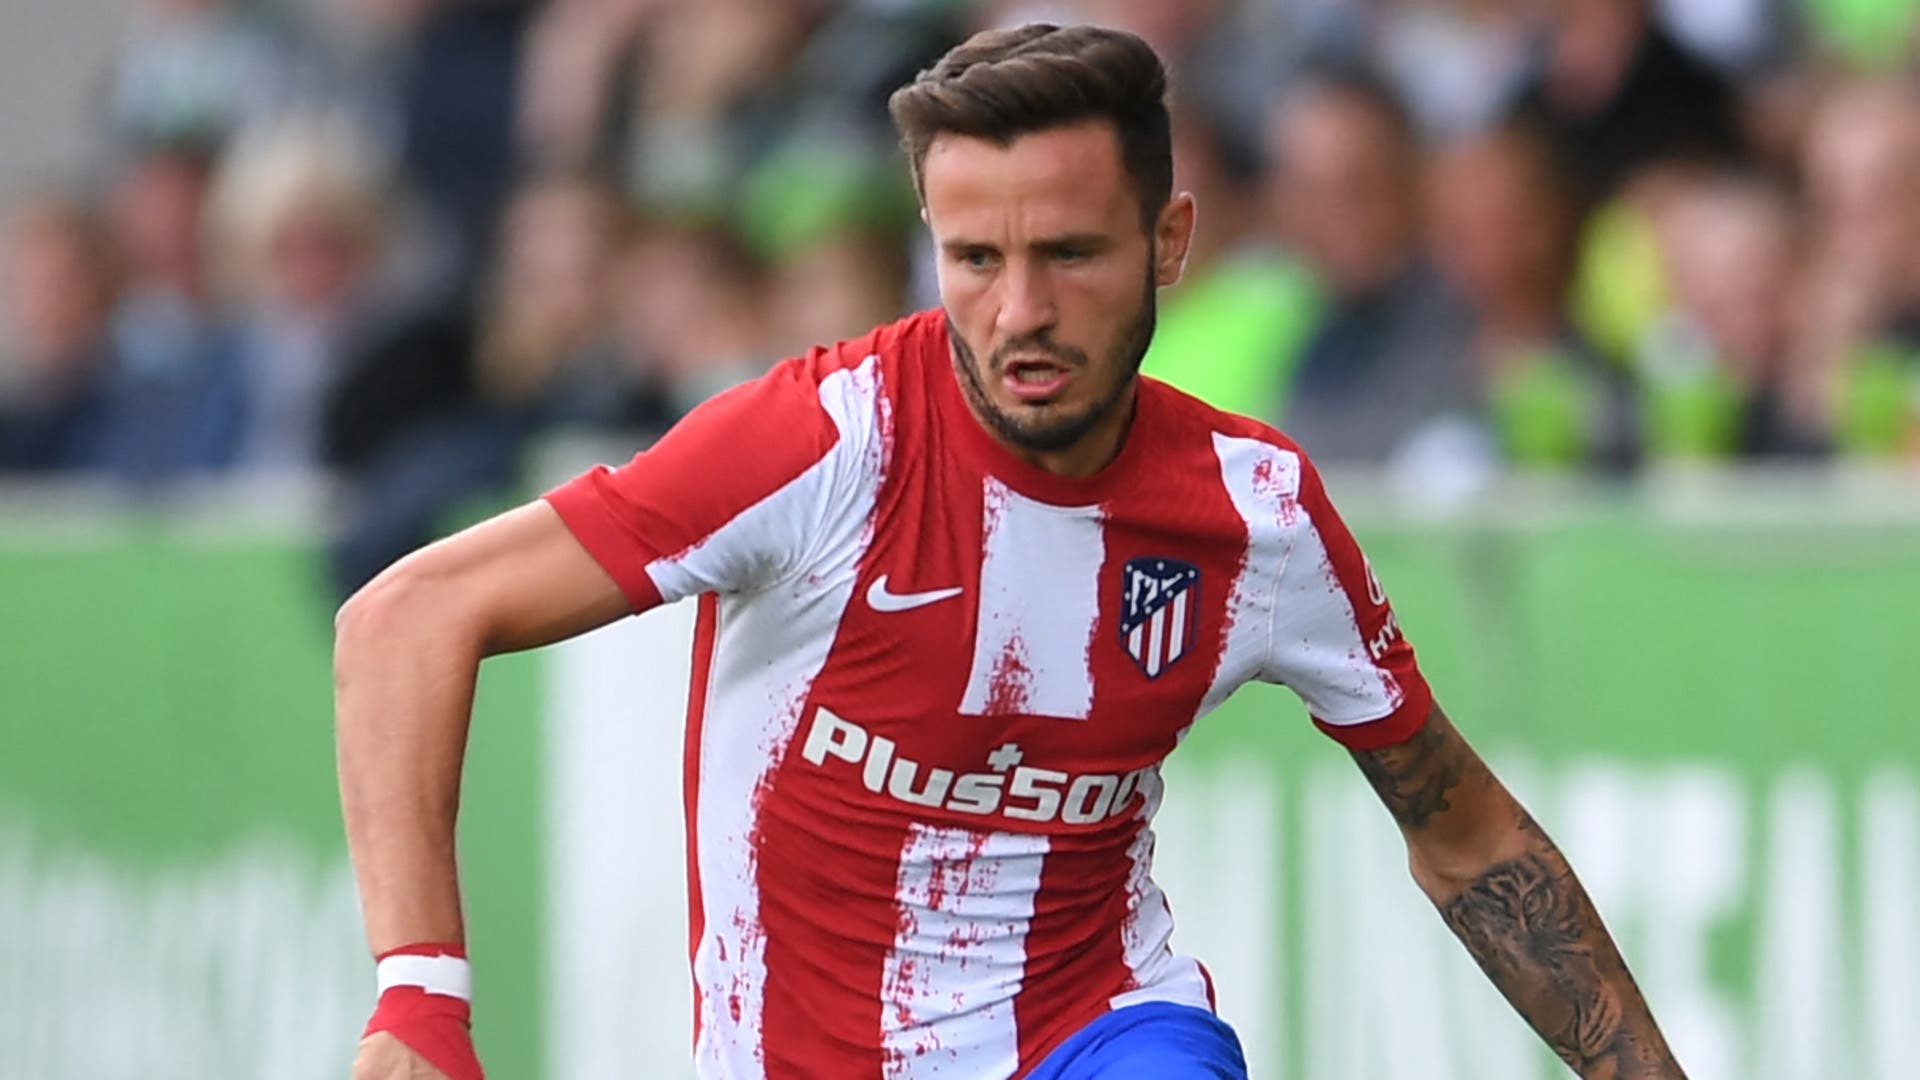 Team willing to get Atlético out of the quagmire with Saúl
